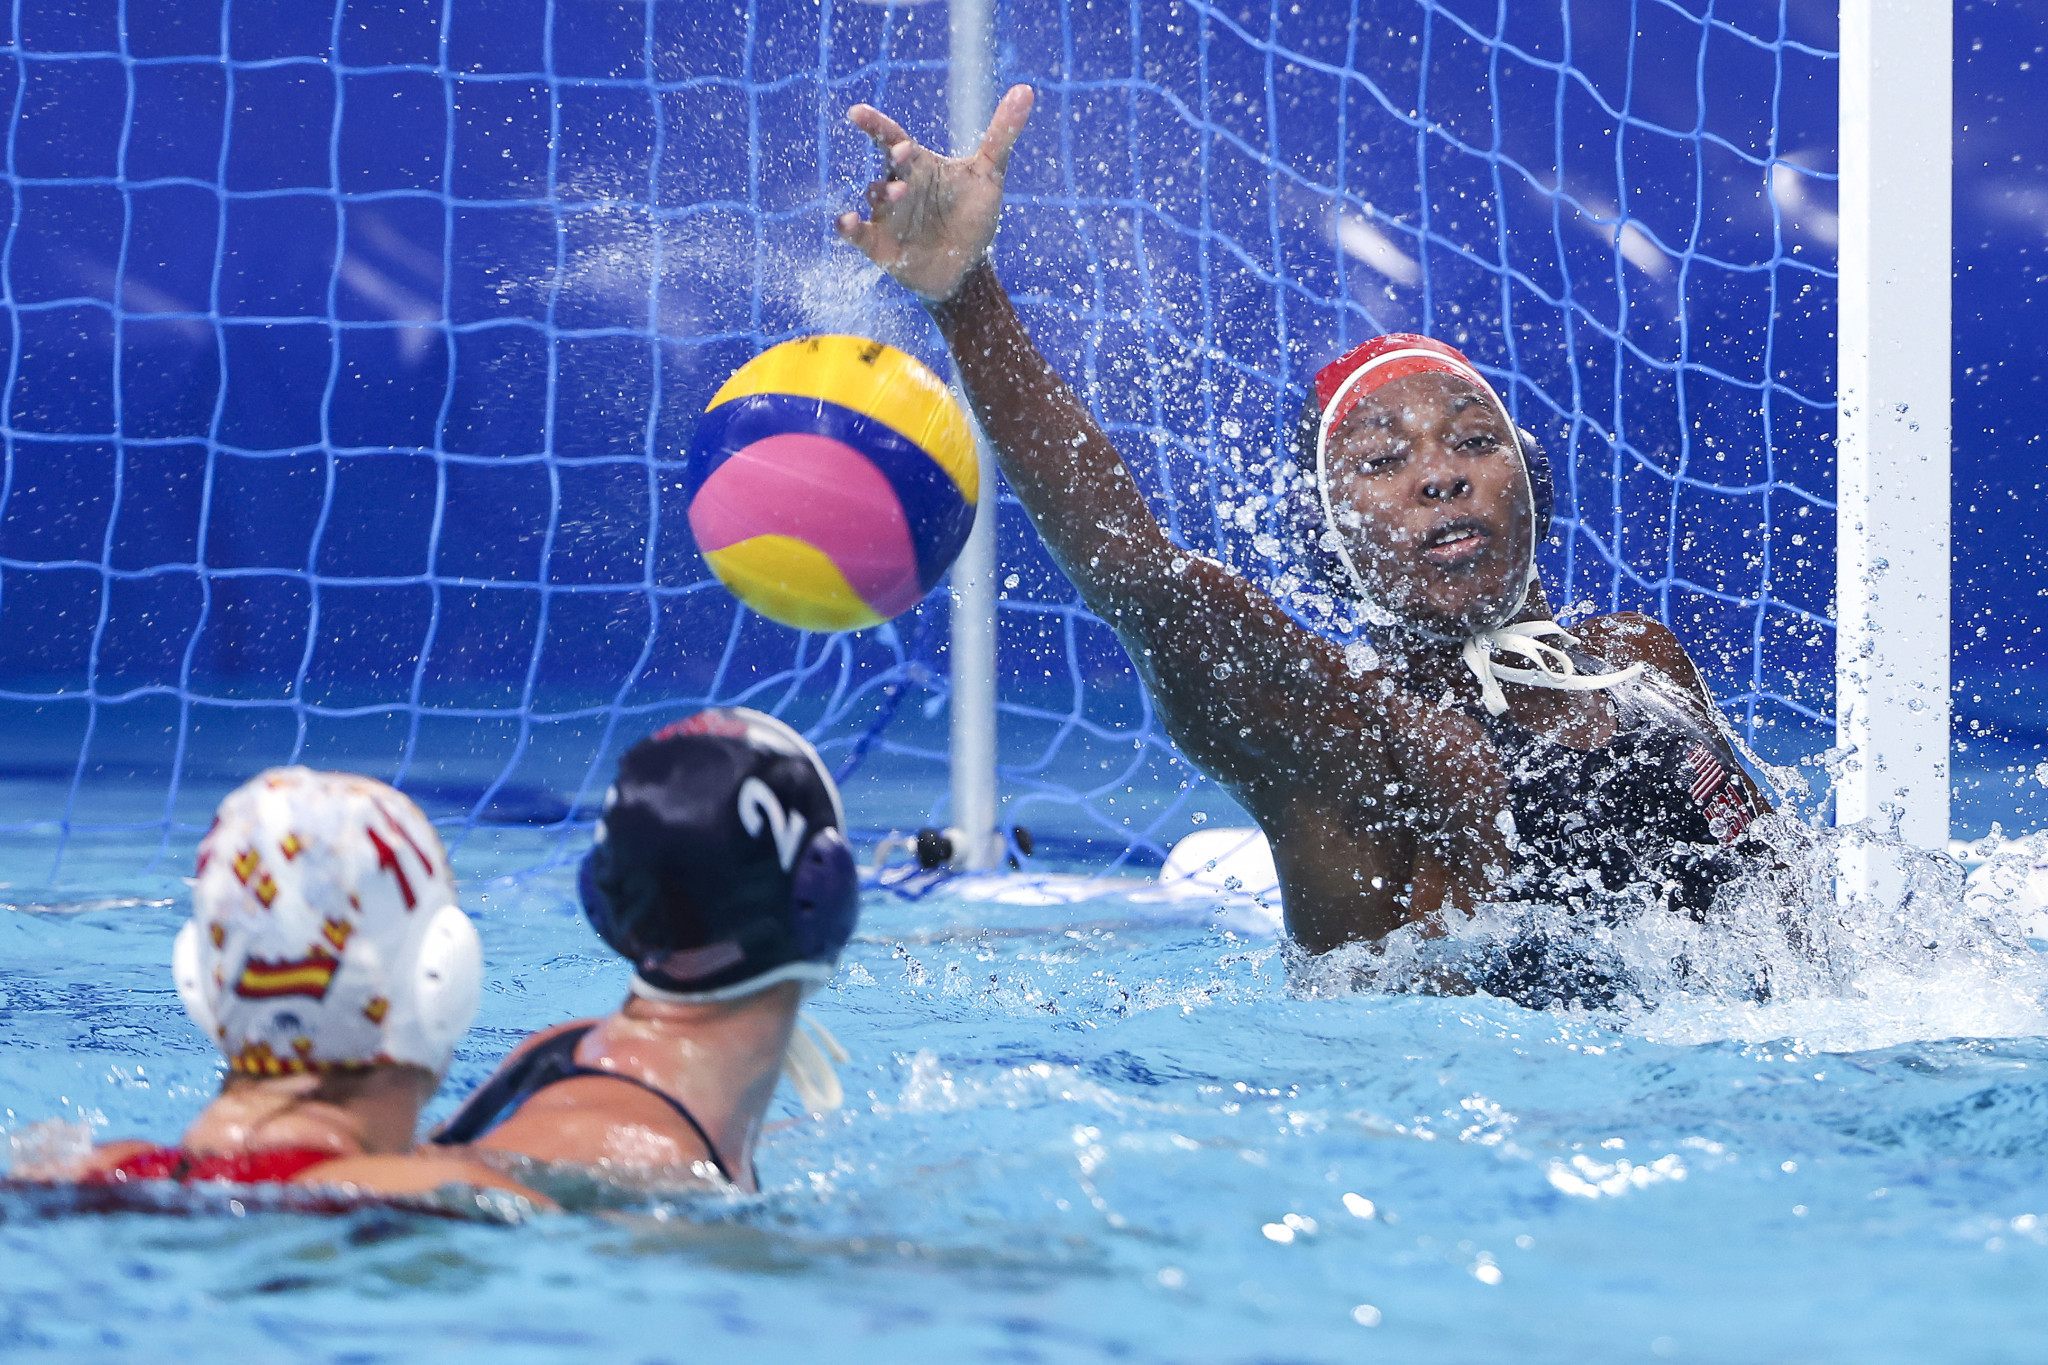 Ashleigh Johnson was superb in the American goal as Spain were brushed aside ©Getty Images